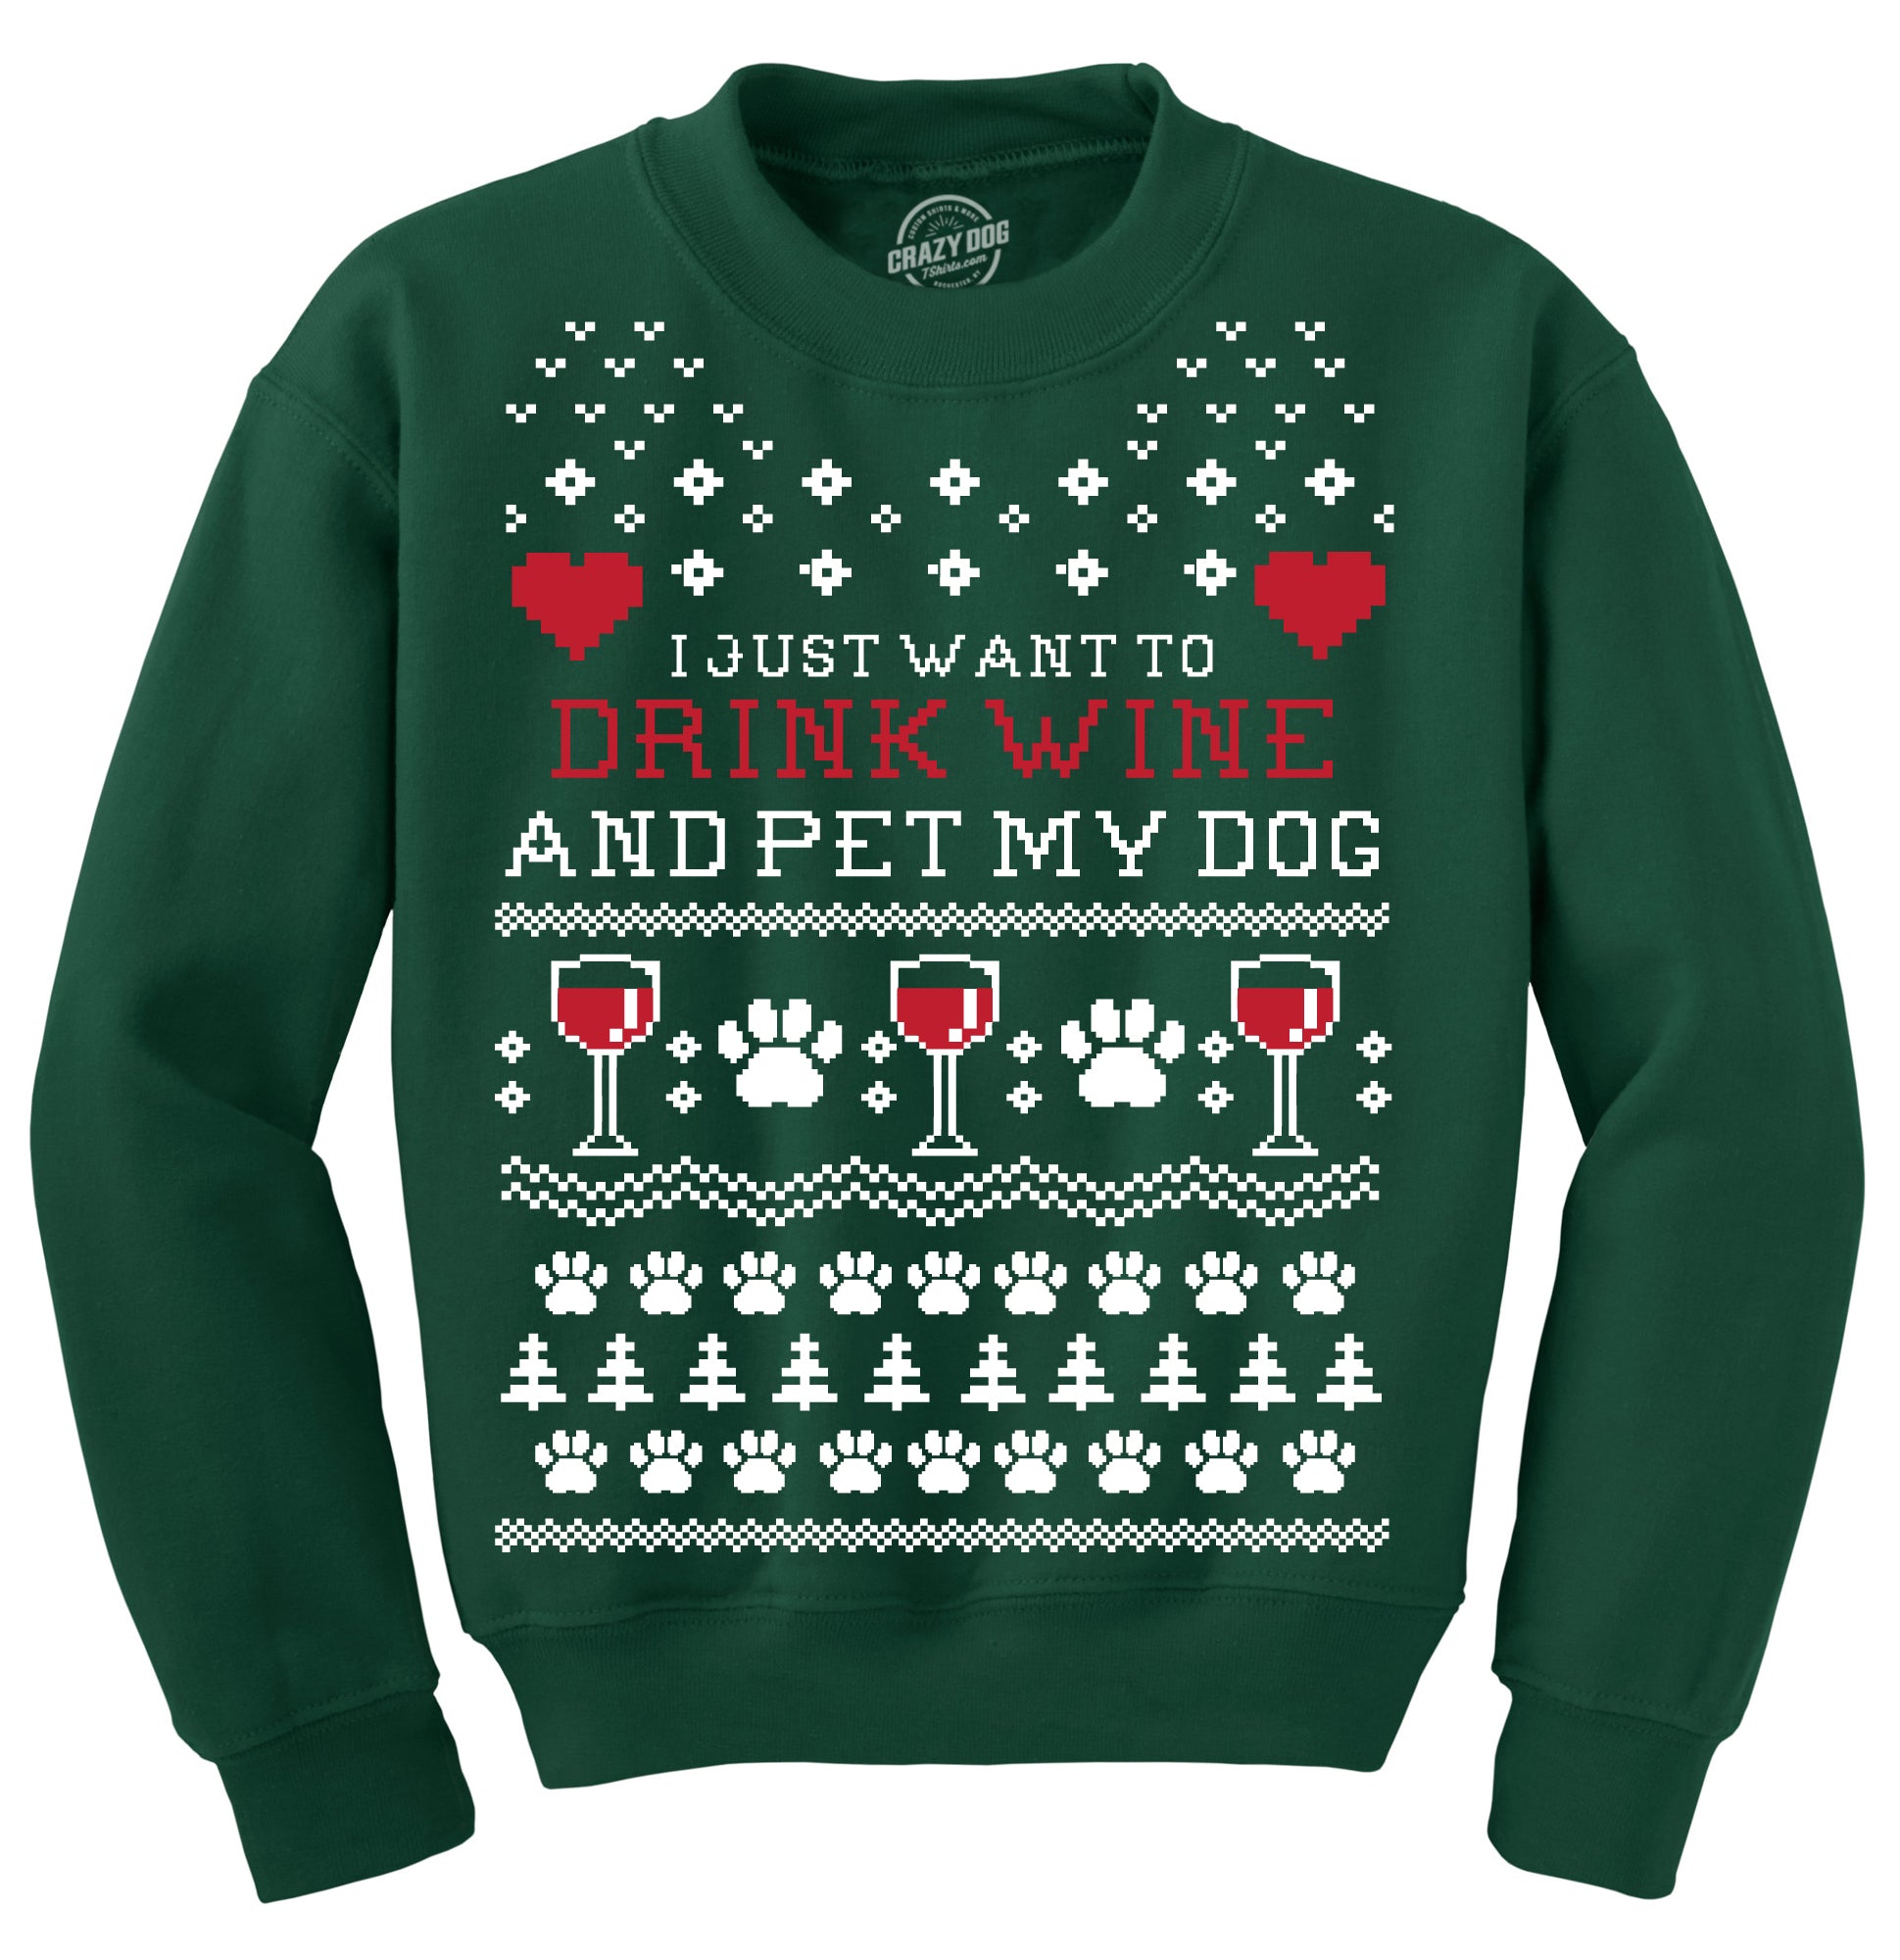 Funny I Just Want To Drink Wine and Pet My Dog Sweatshirt Nerdy Christmas Dog Drinking Ugly Sweater Tee